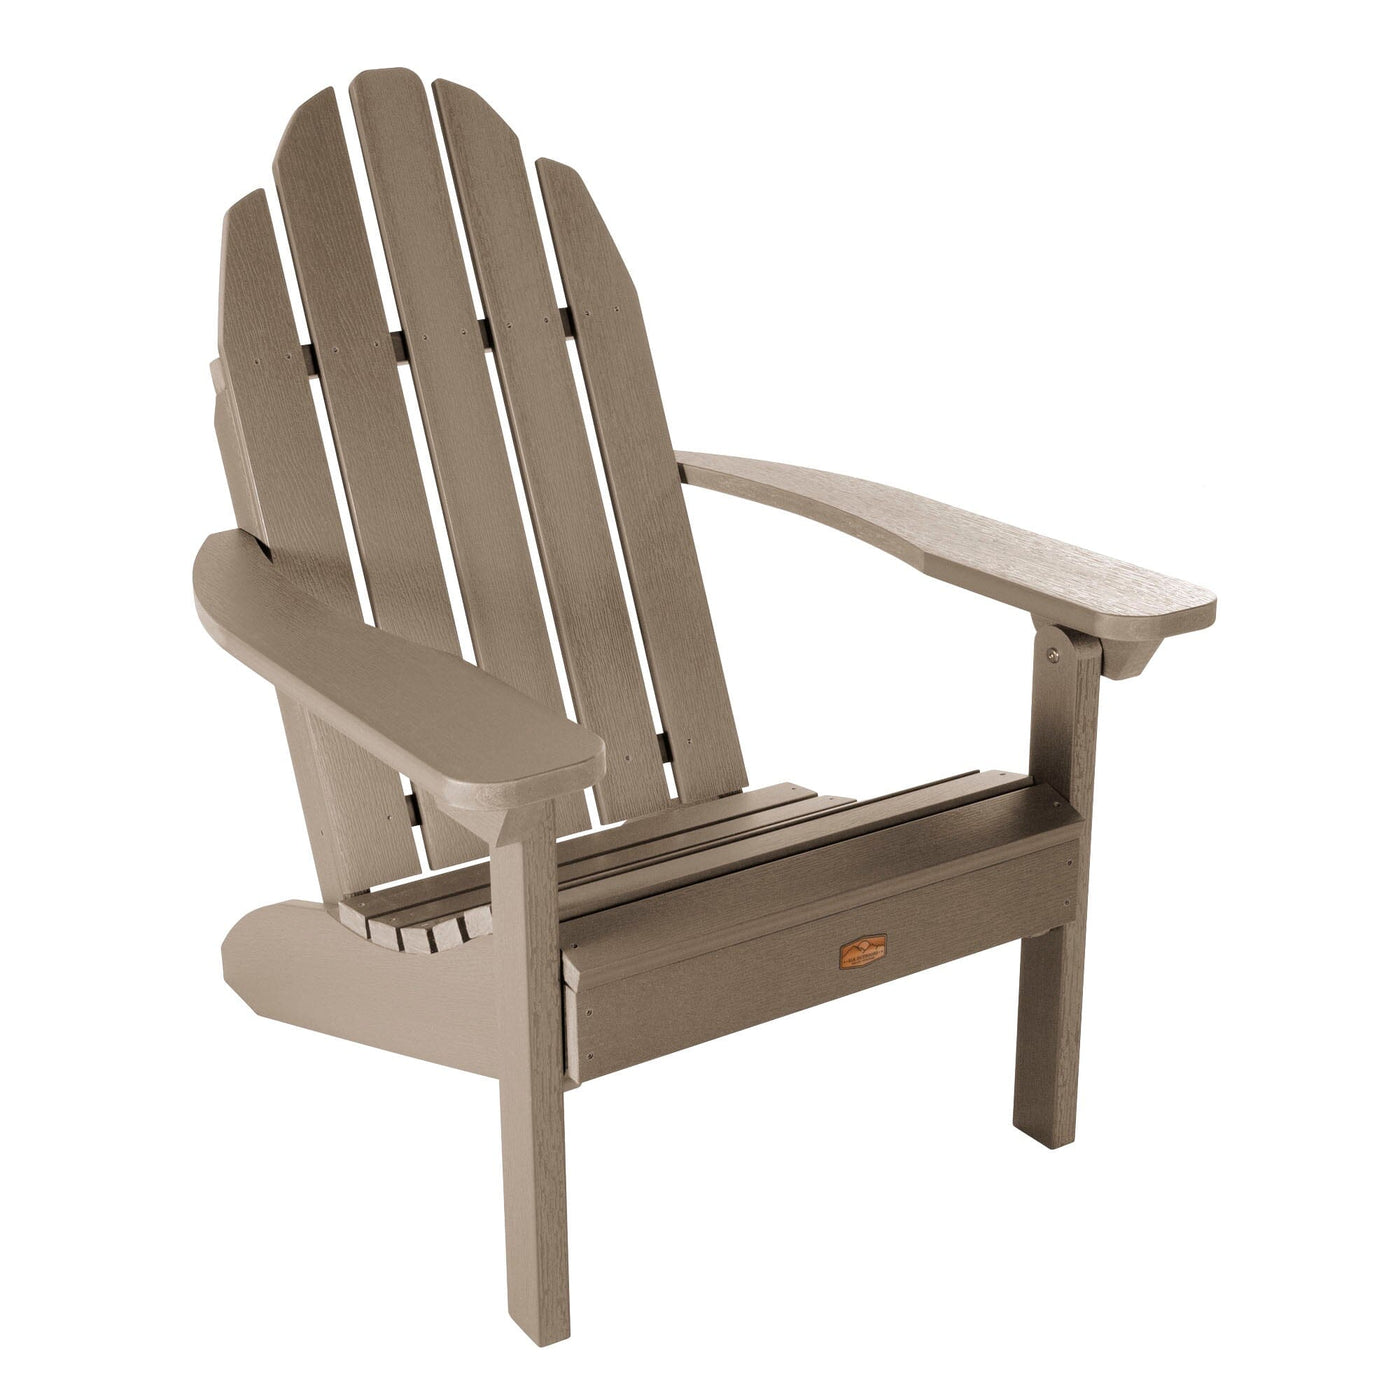 The Essential Adirondack Chair Adirondack Chairs ELK OUTDOORS® Woodland Brown 